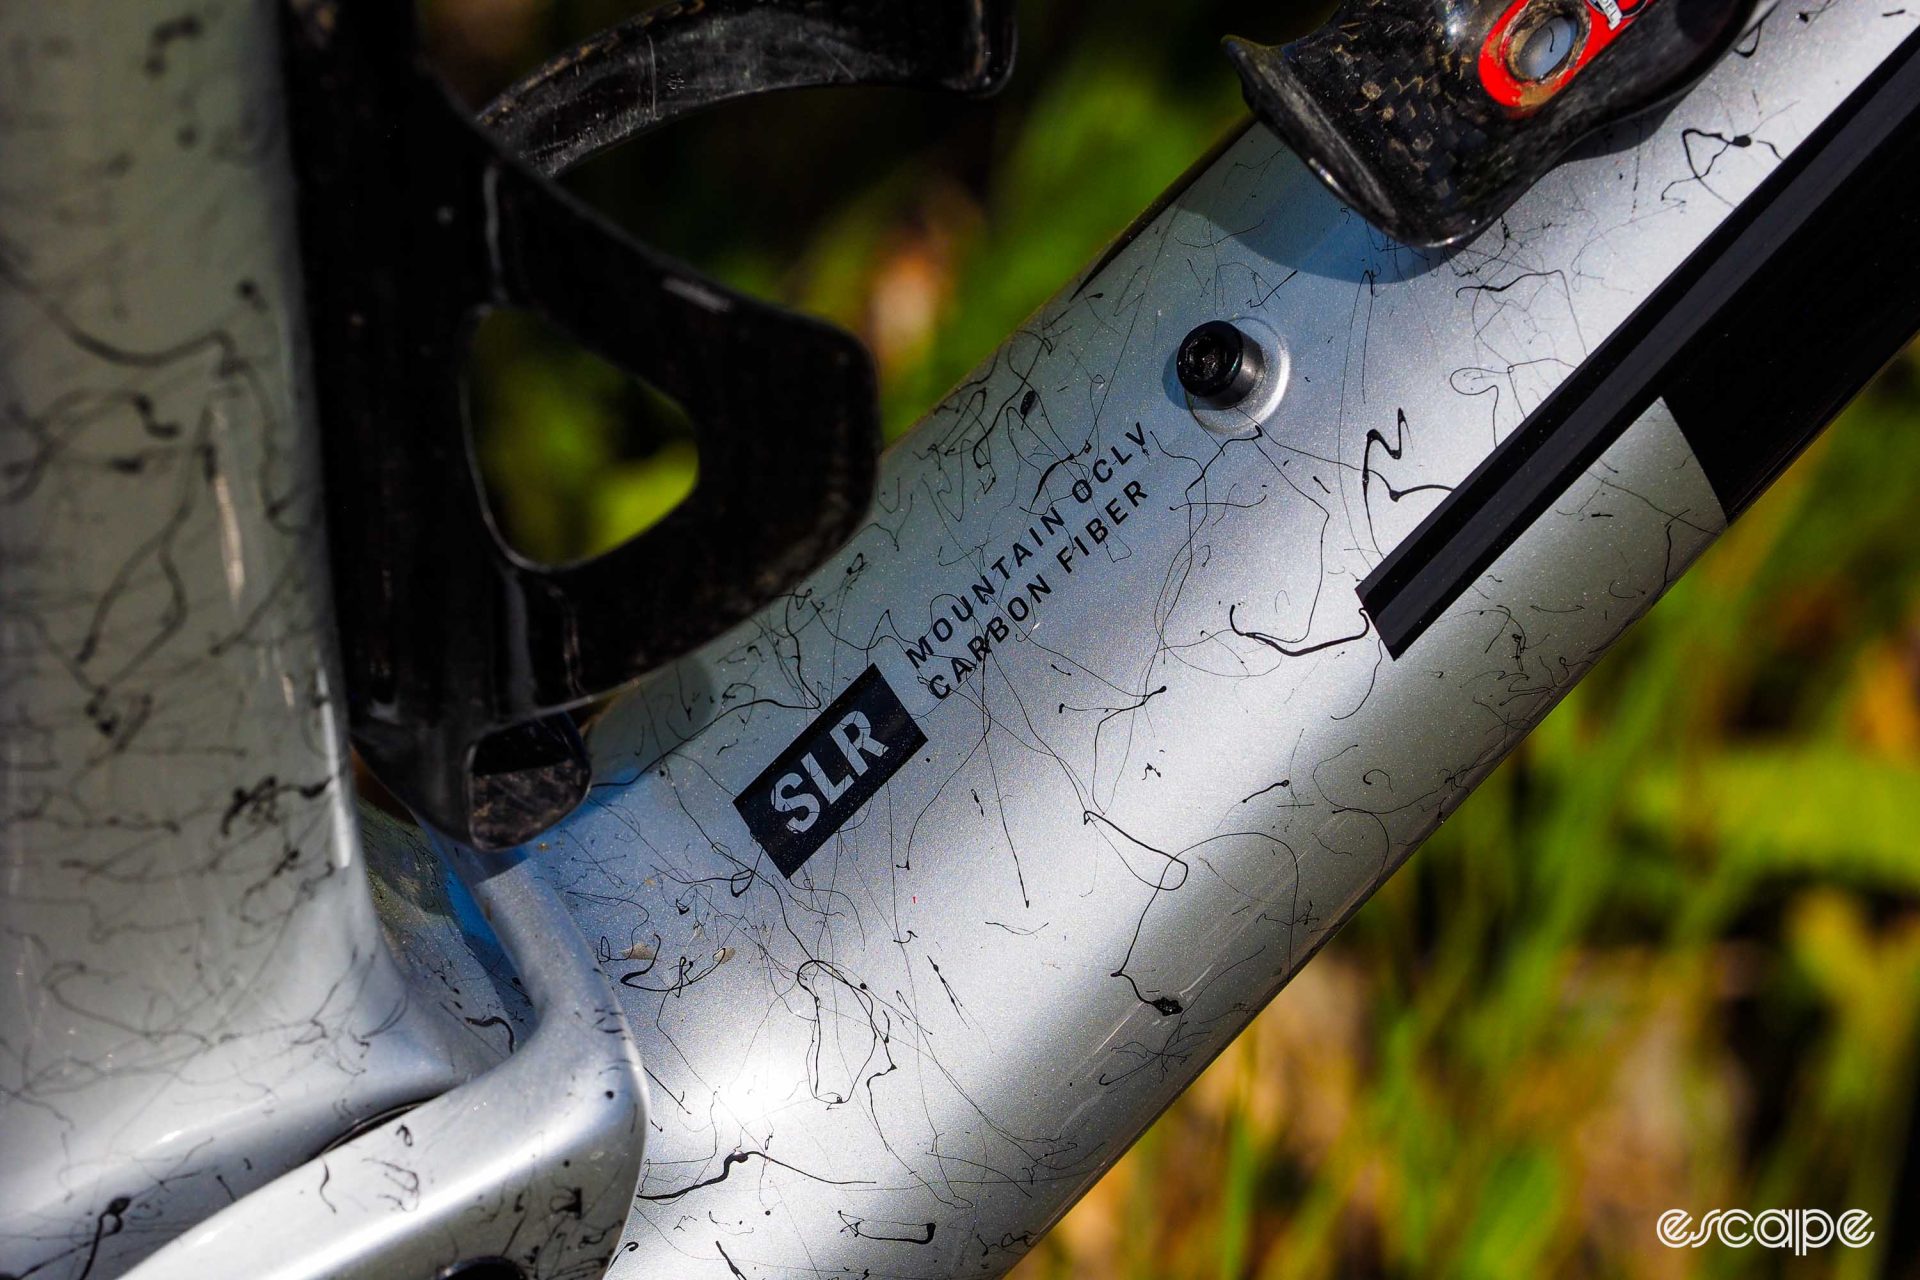 Trek offers the Supercaliber in two variants, including the SLR carbon fiber version shown in this closeup of the logo on the downtube.